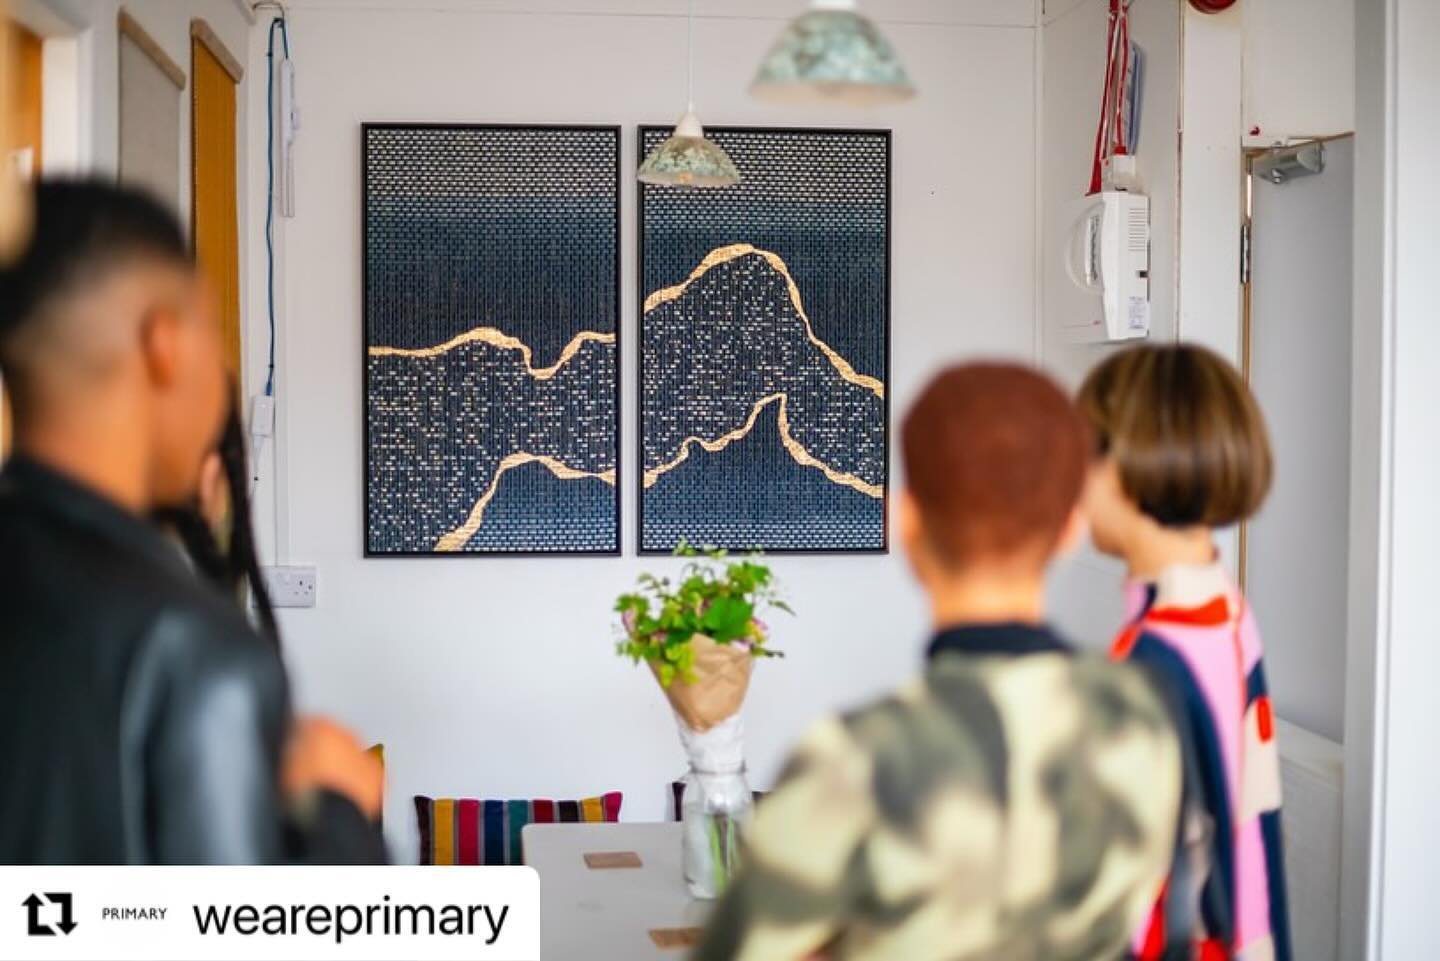 What a great event it was! 
Thank you @weareprimary for being so warm and supportive community. 

#Repost @weareprimary with @use.repost
・・・
Thank you everyone who joined us last night for Primary&rsquo;s first social mixer - &lsquo;Artists Mentoring